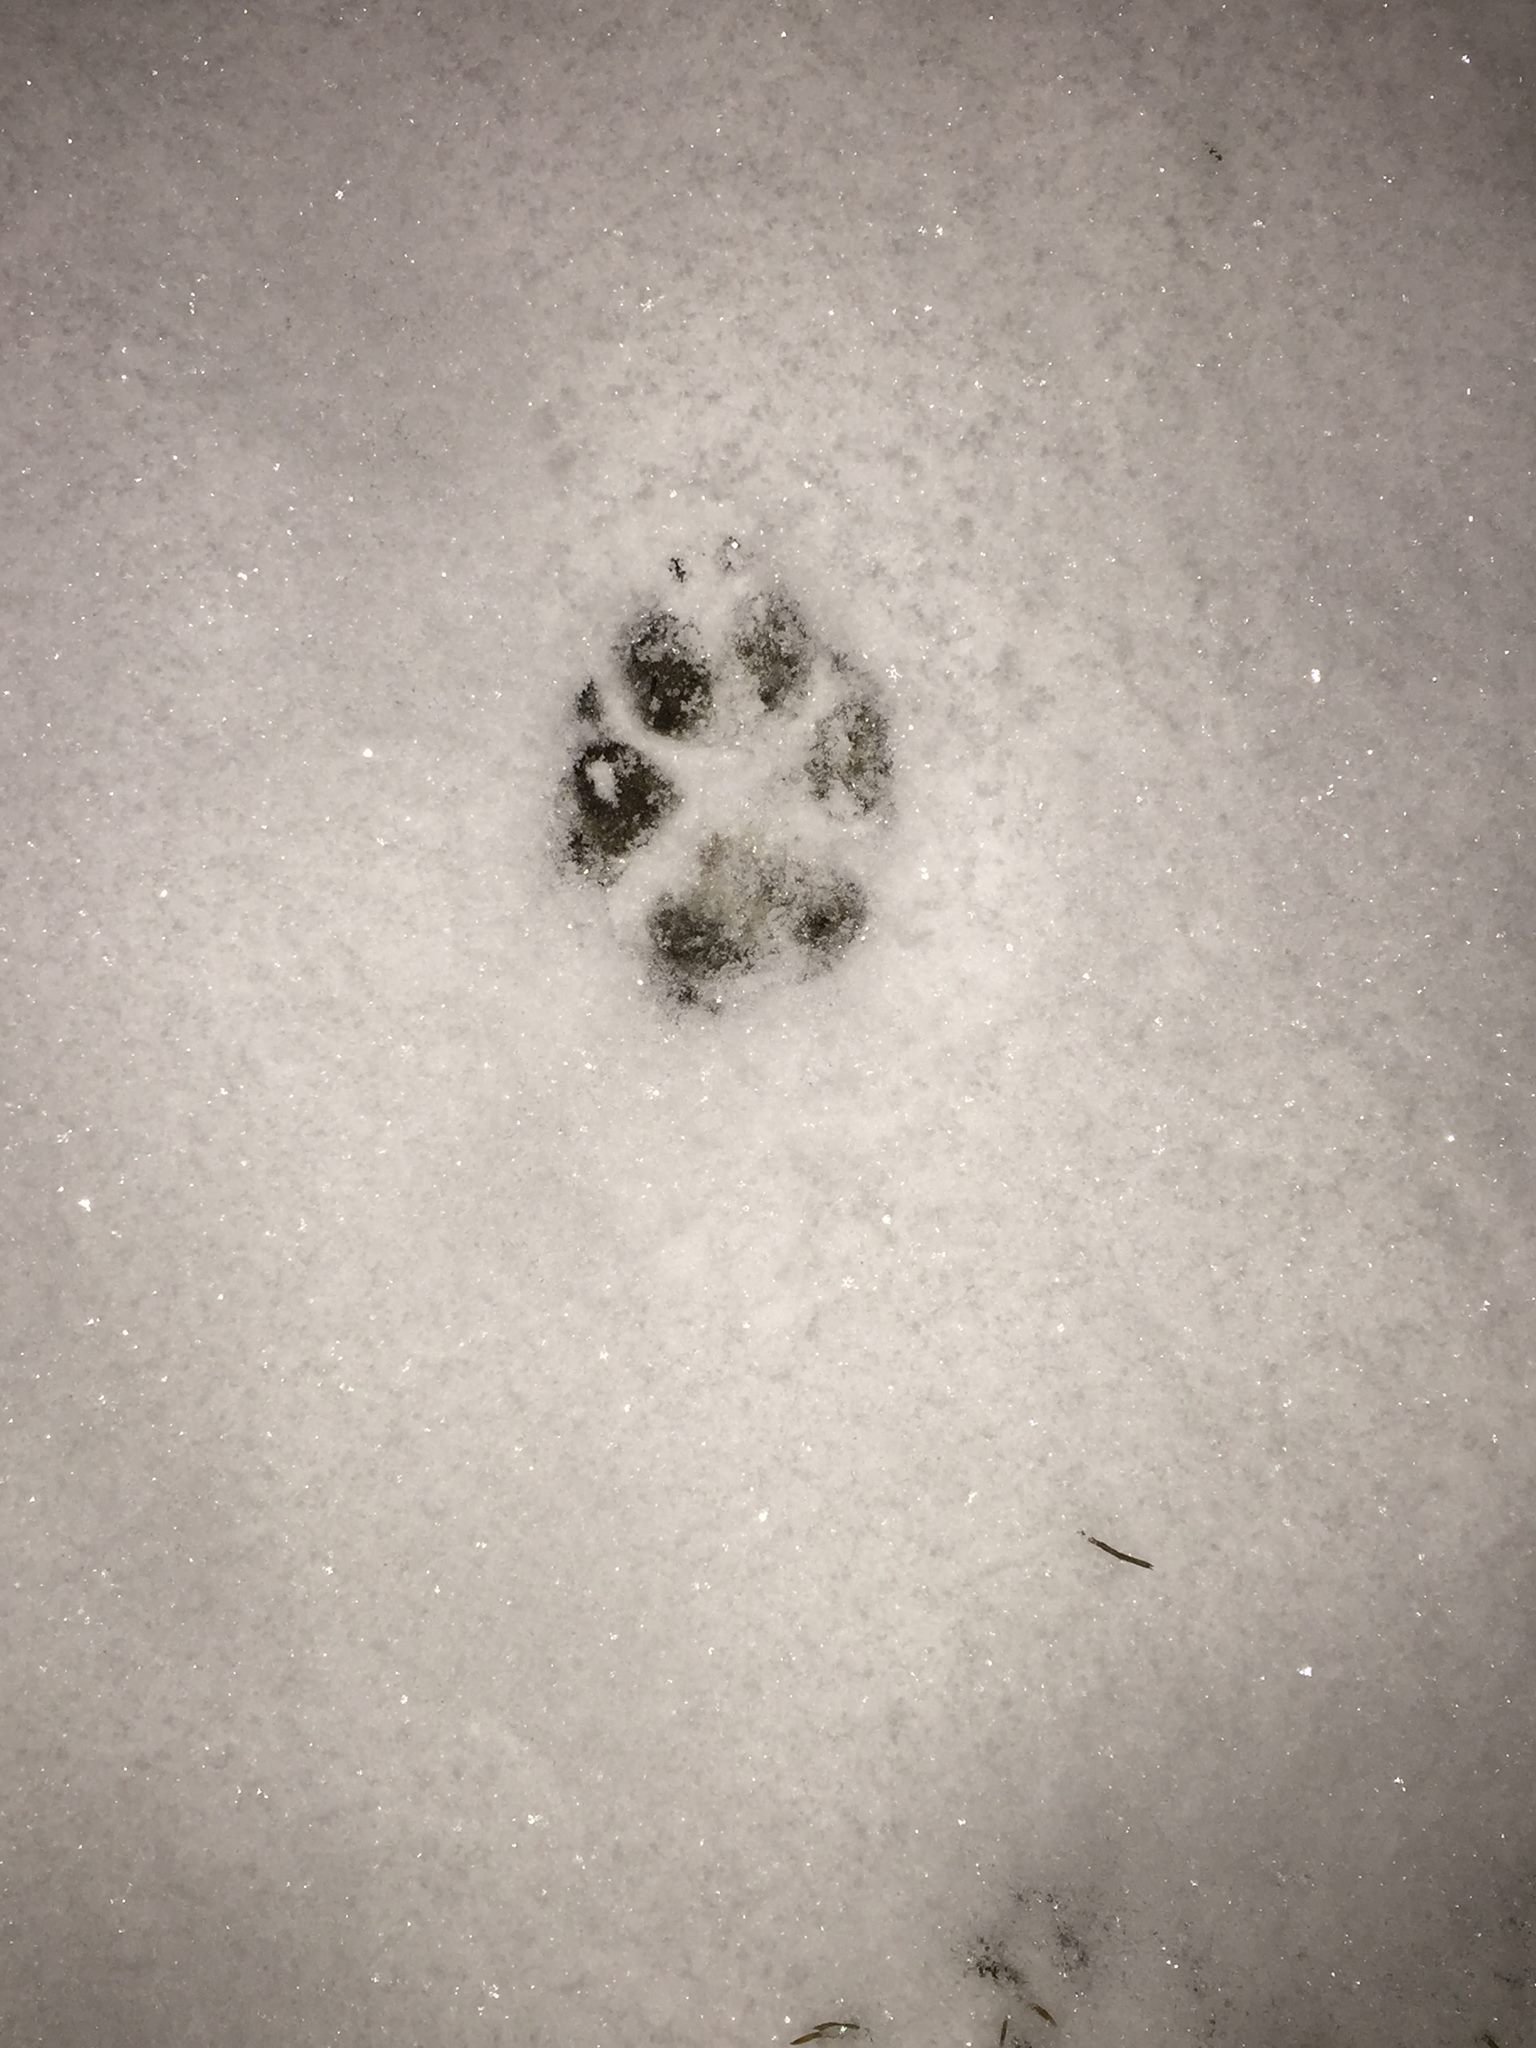 A night time run with a wild snow-loving beast.